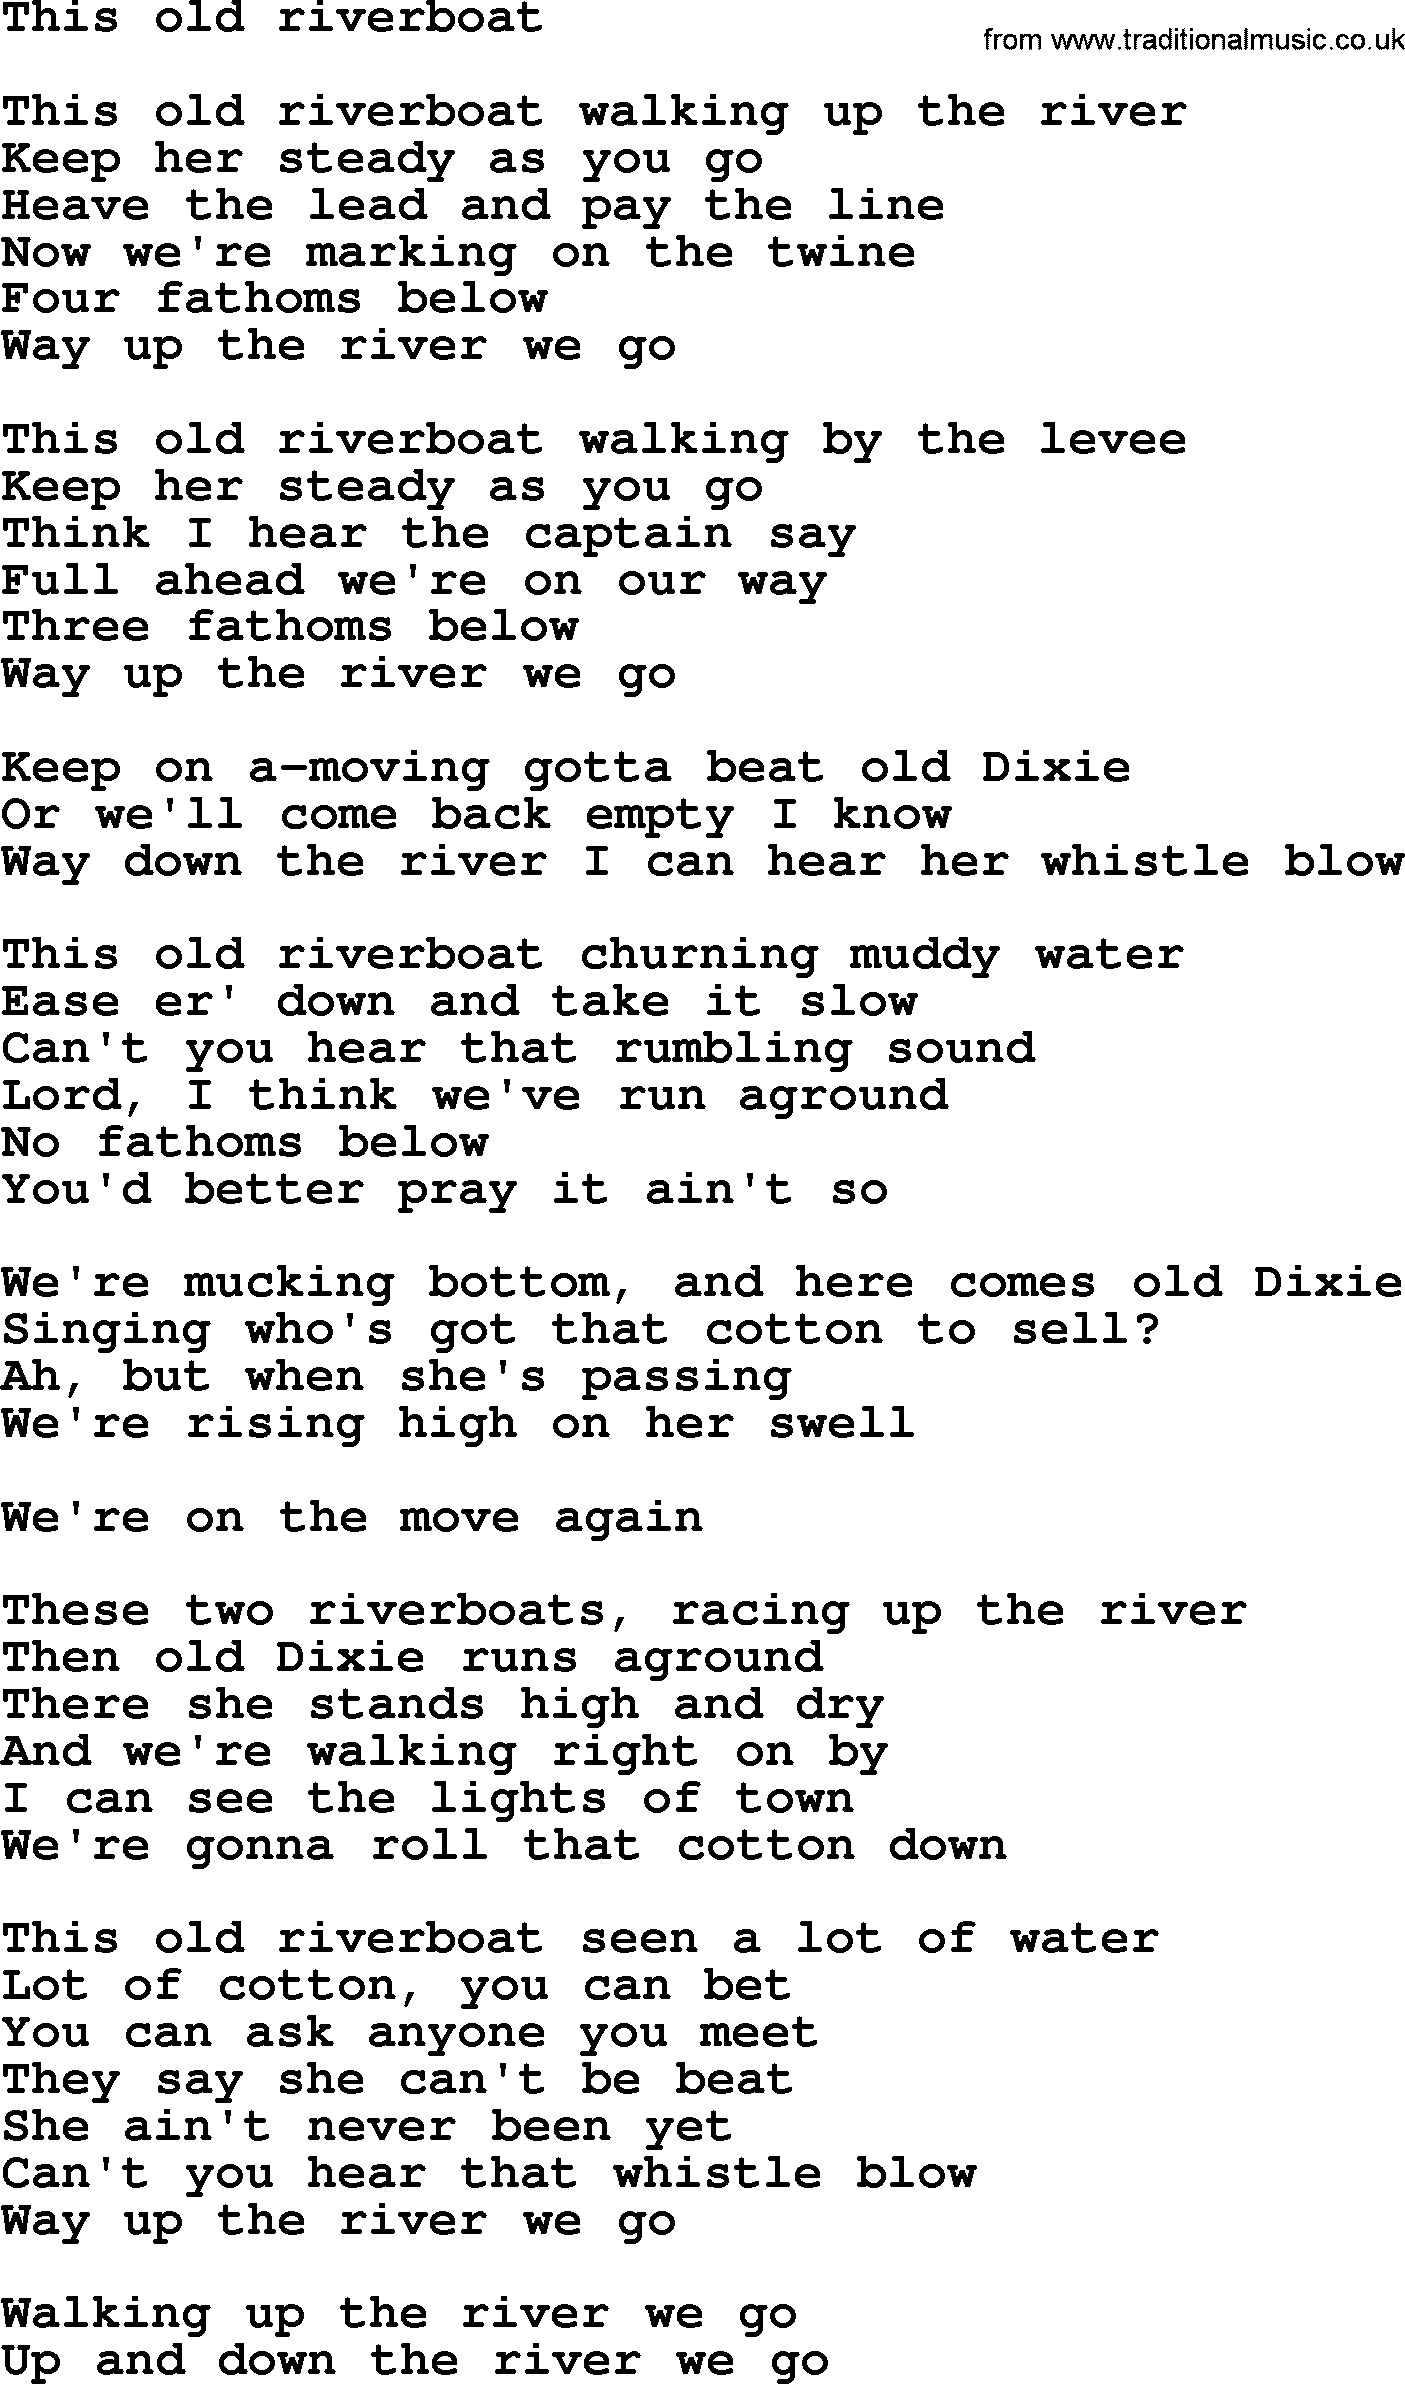 The Byrds song This Old Riverboat, lyrics